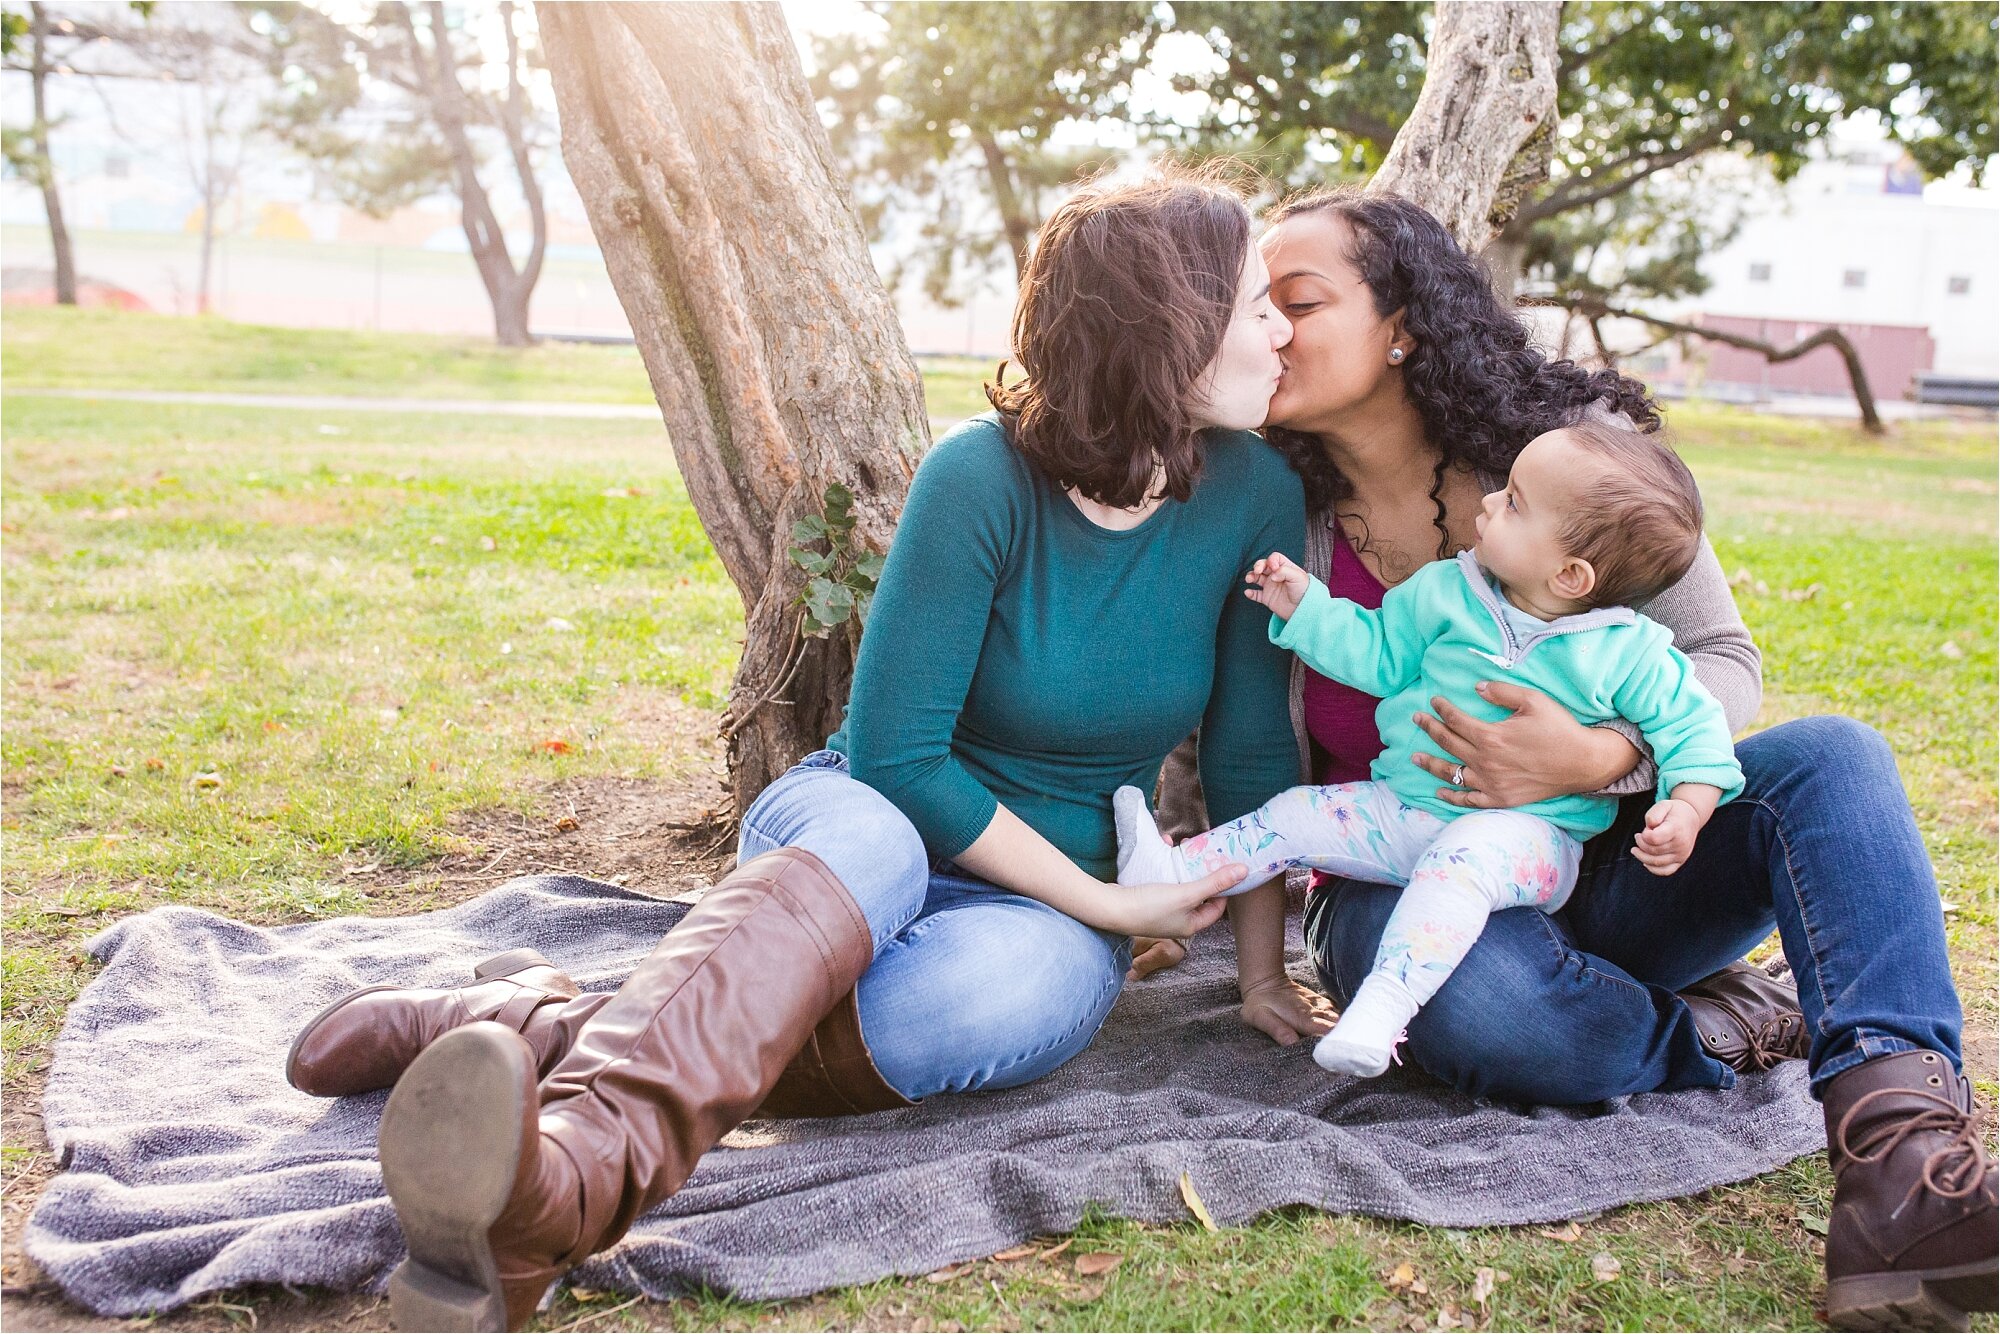 Gay married mommies kiss each other while their daughter looks at them, Family Photograph Philadelphia